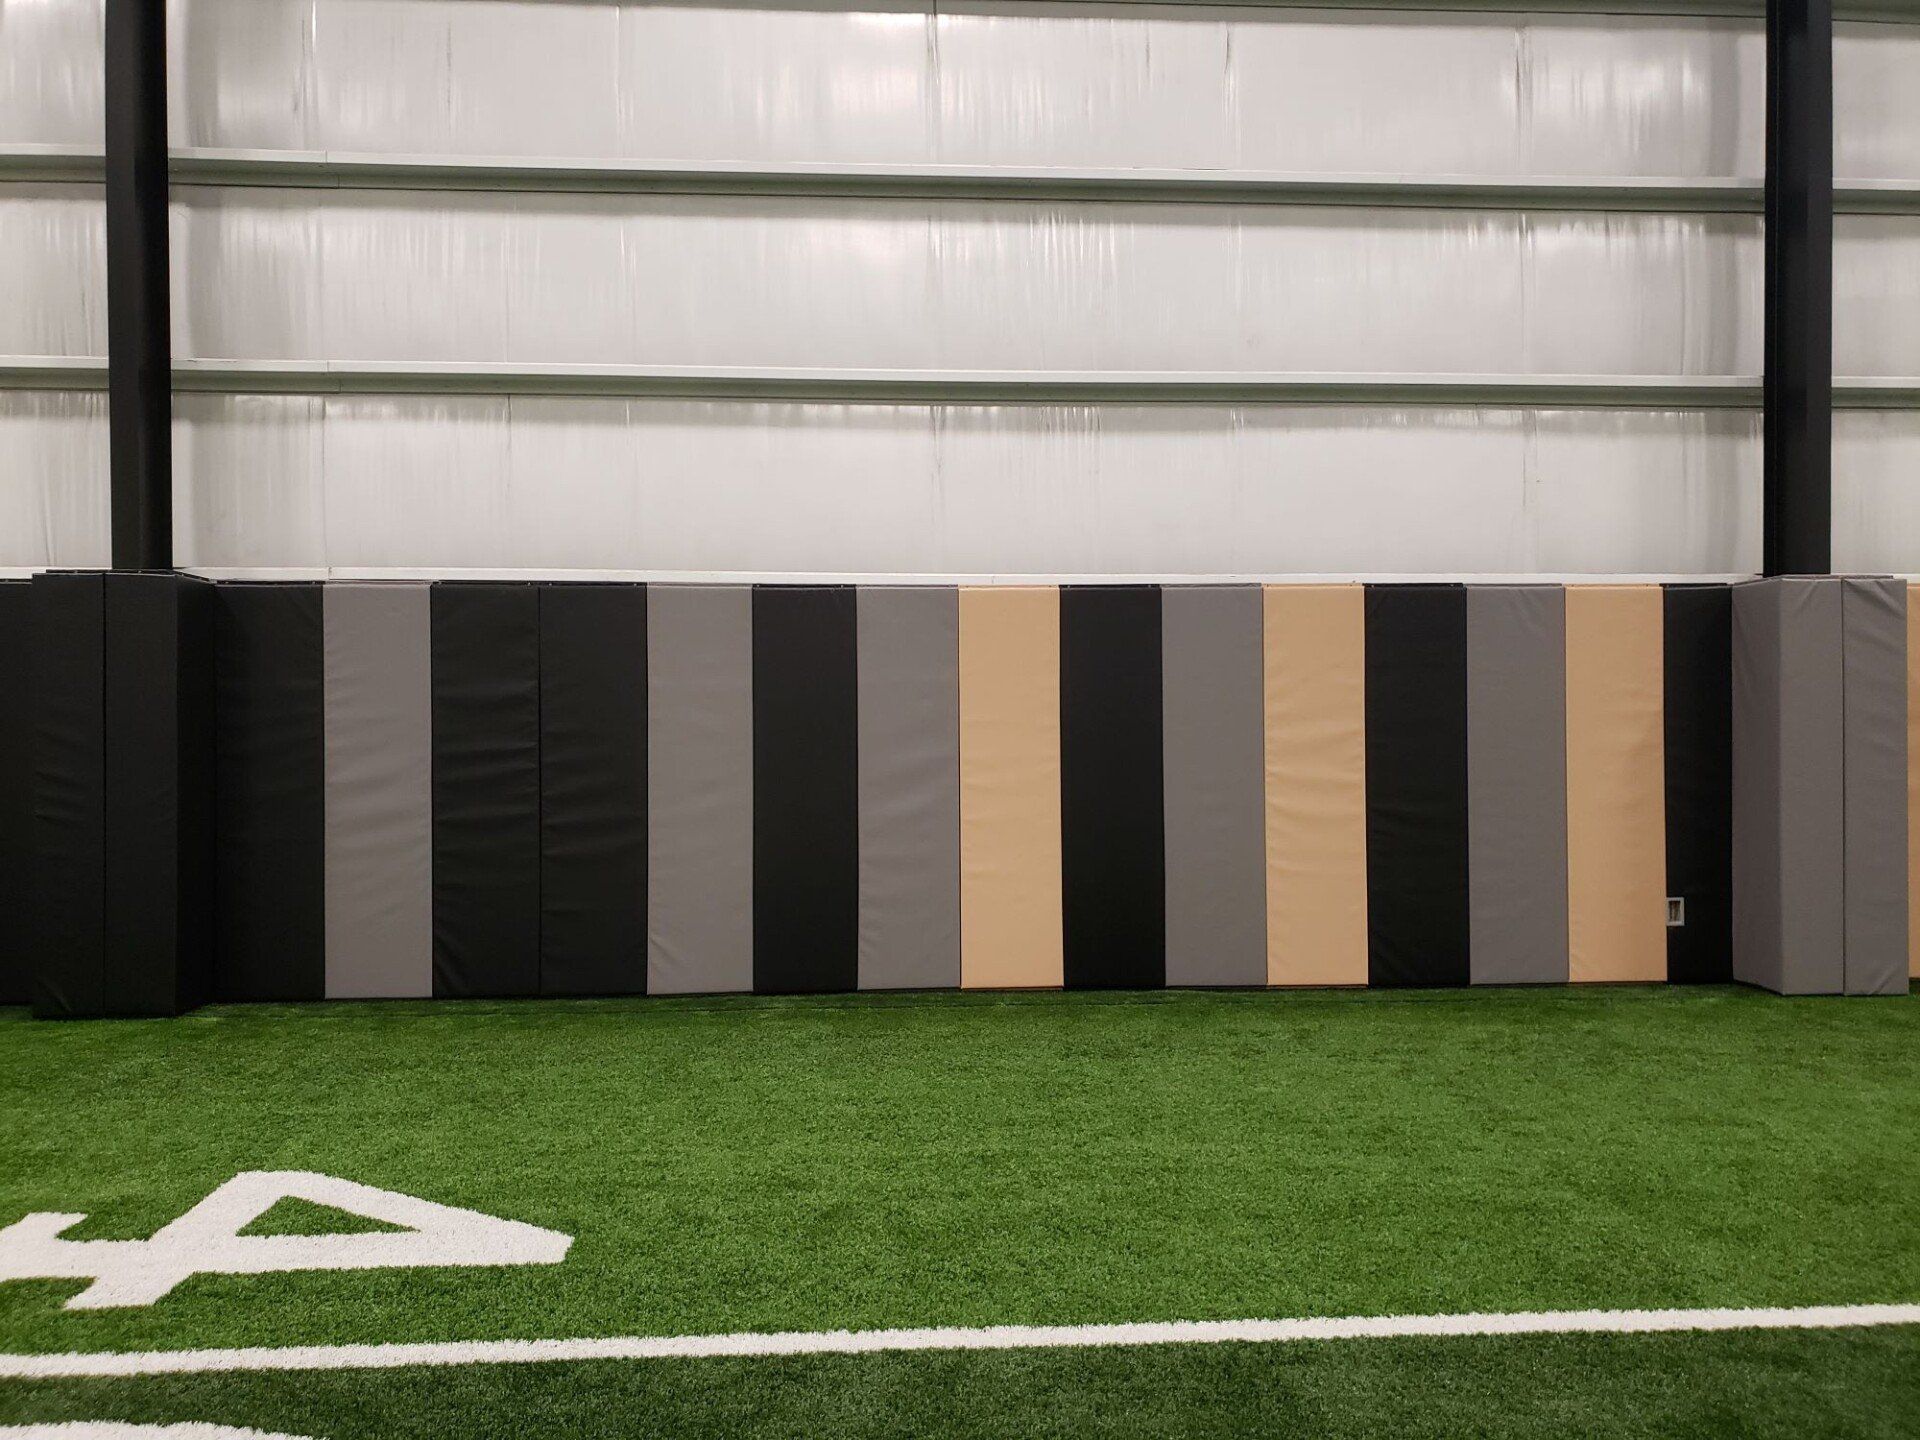 image of indoor athletic facility